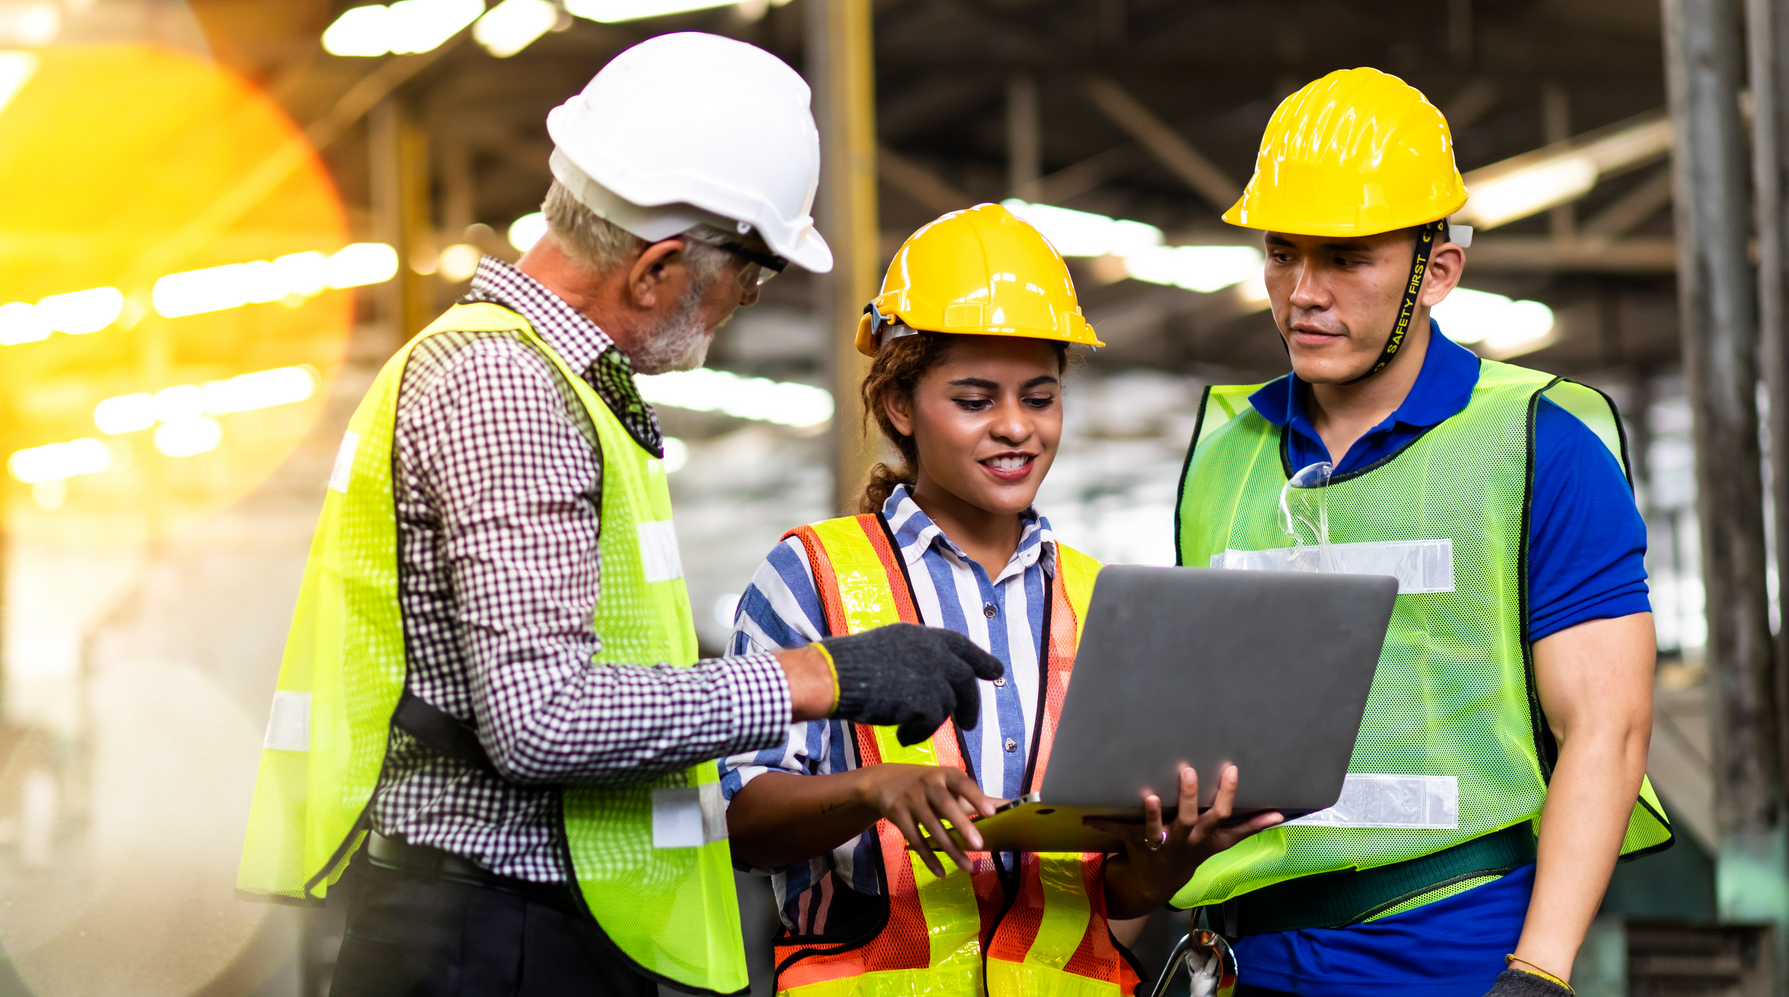 Three workers in hard hats and safety vests collaborating on a laptop at a construction site.